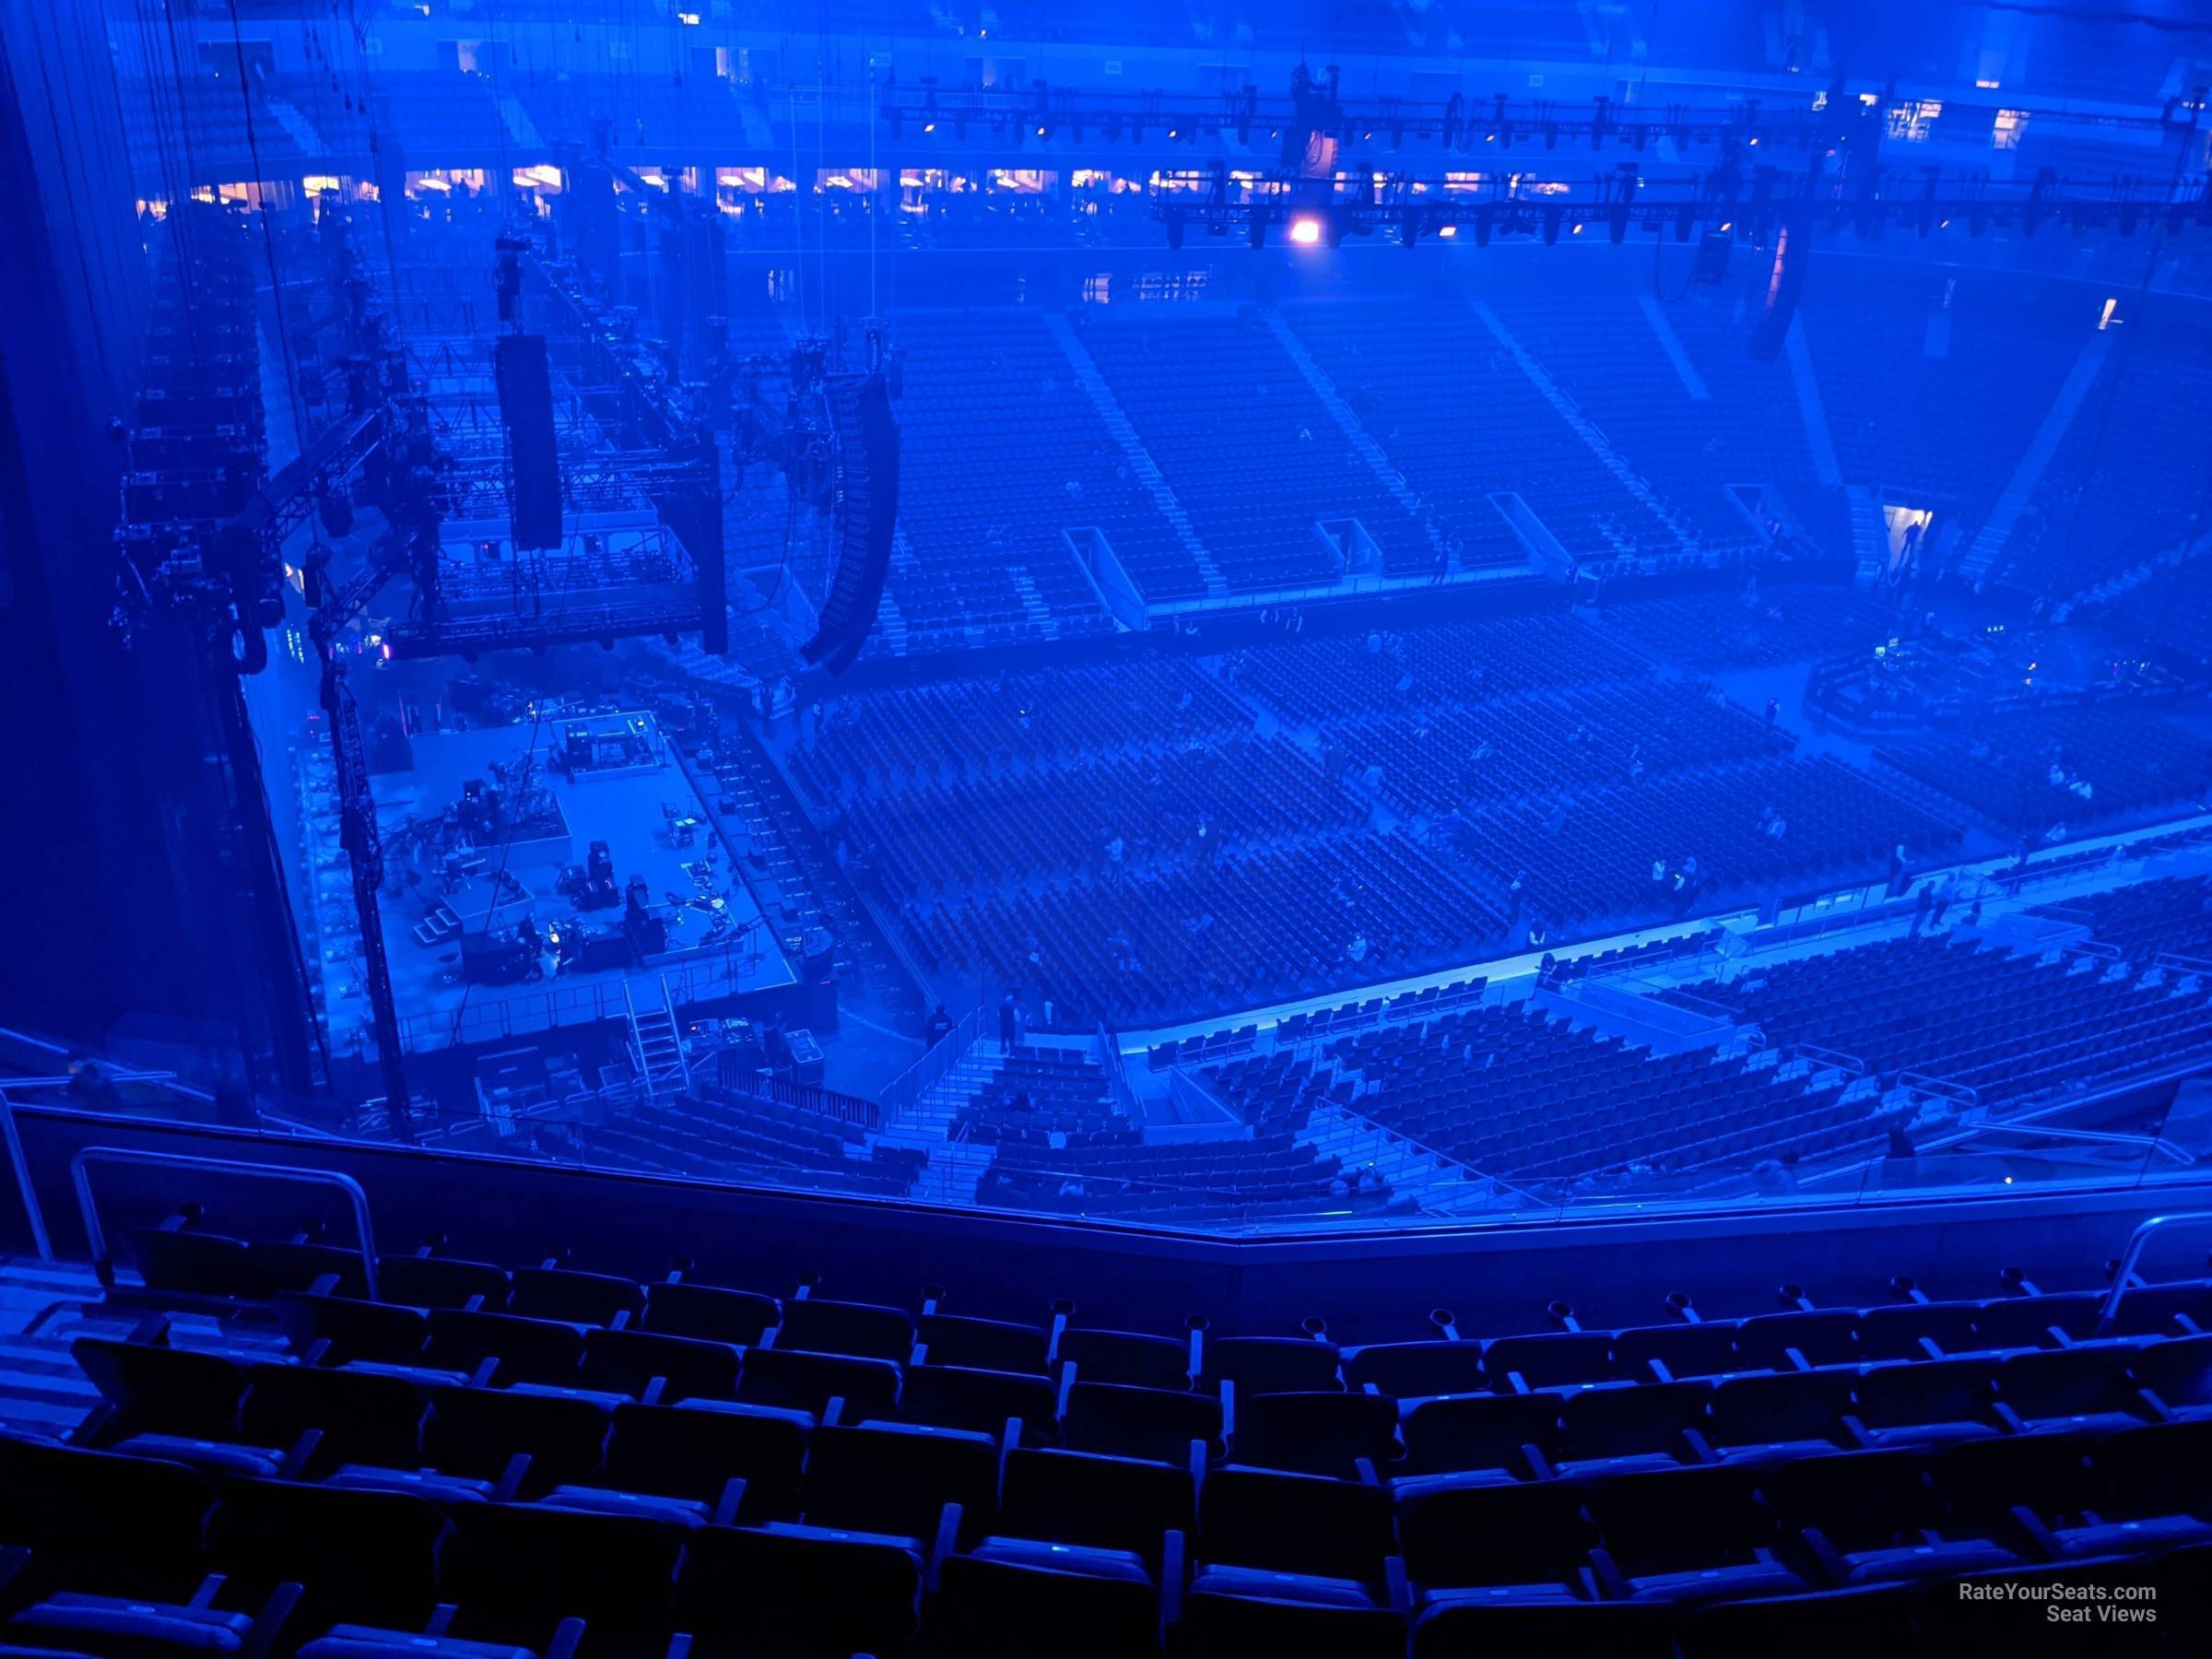 section 324, row 8 seat view  for concert - ubs arena